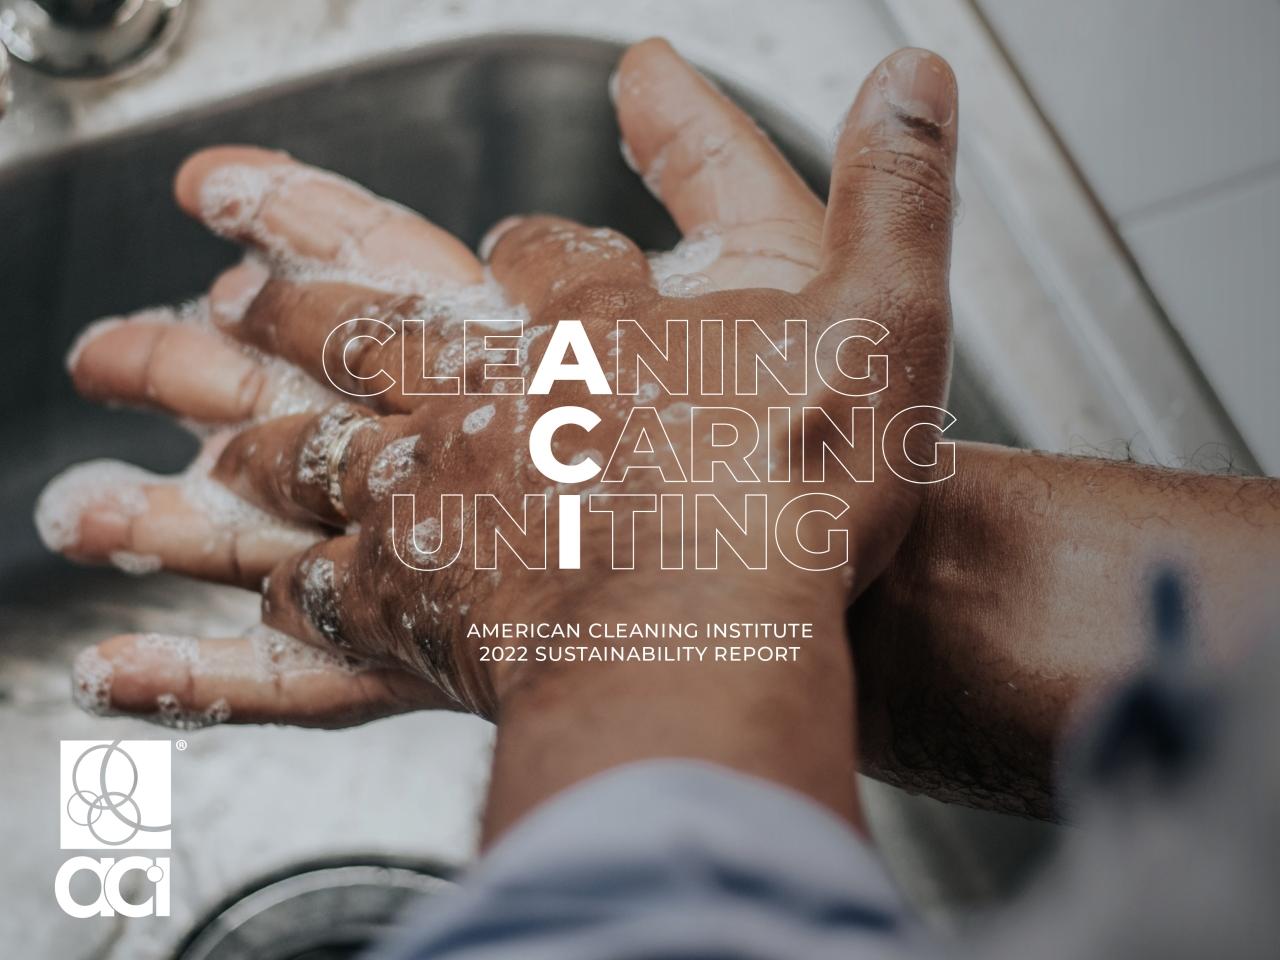 ACI logo superimposed on images of someone washing their hands